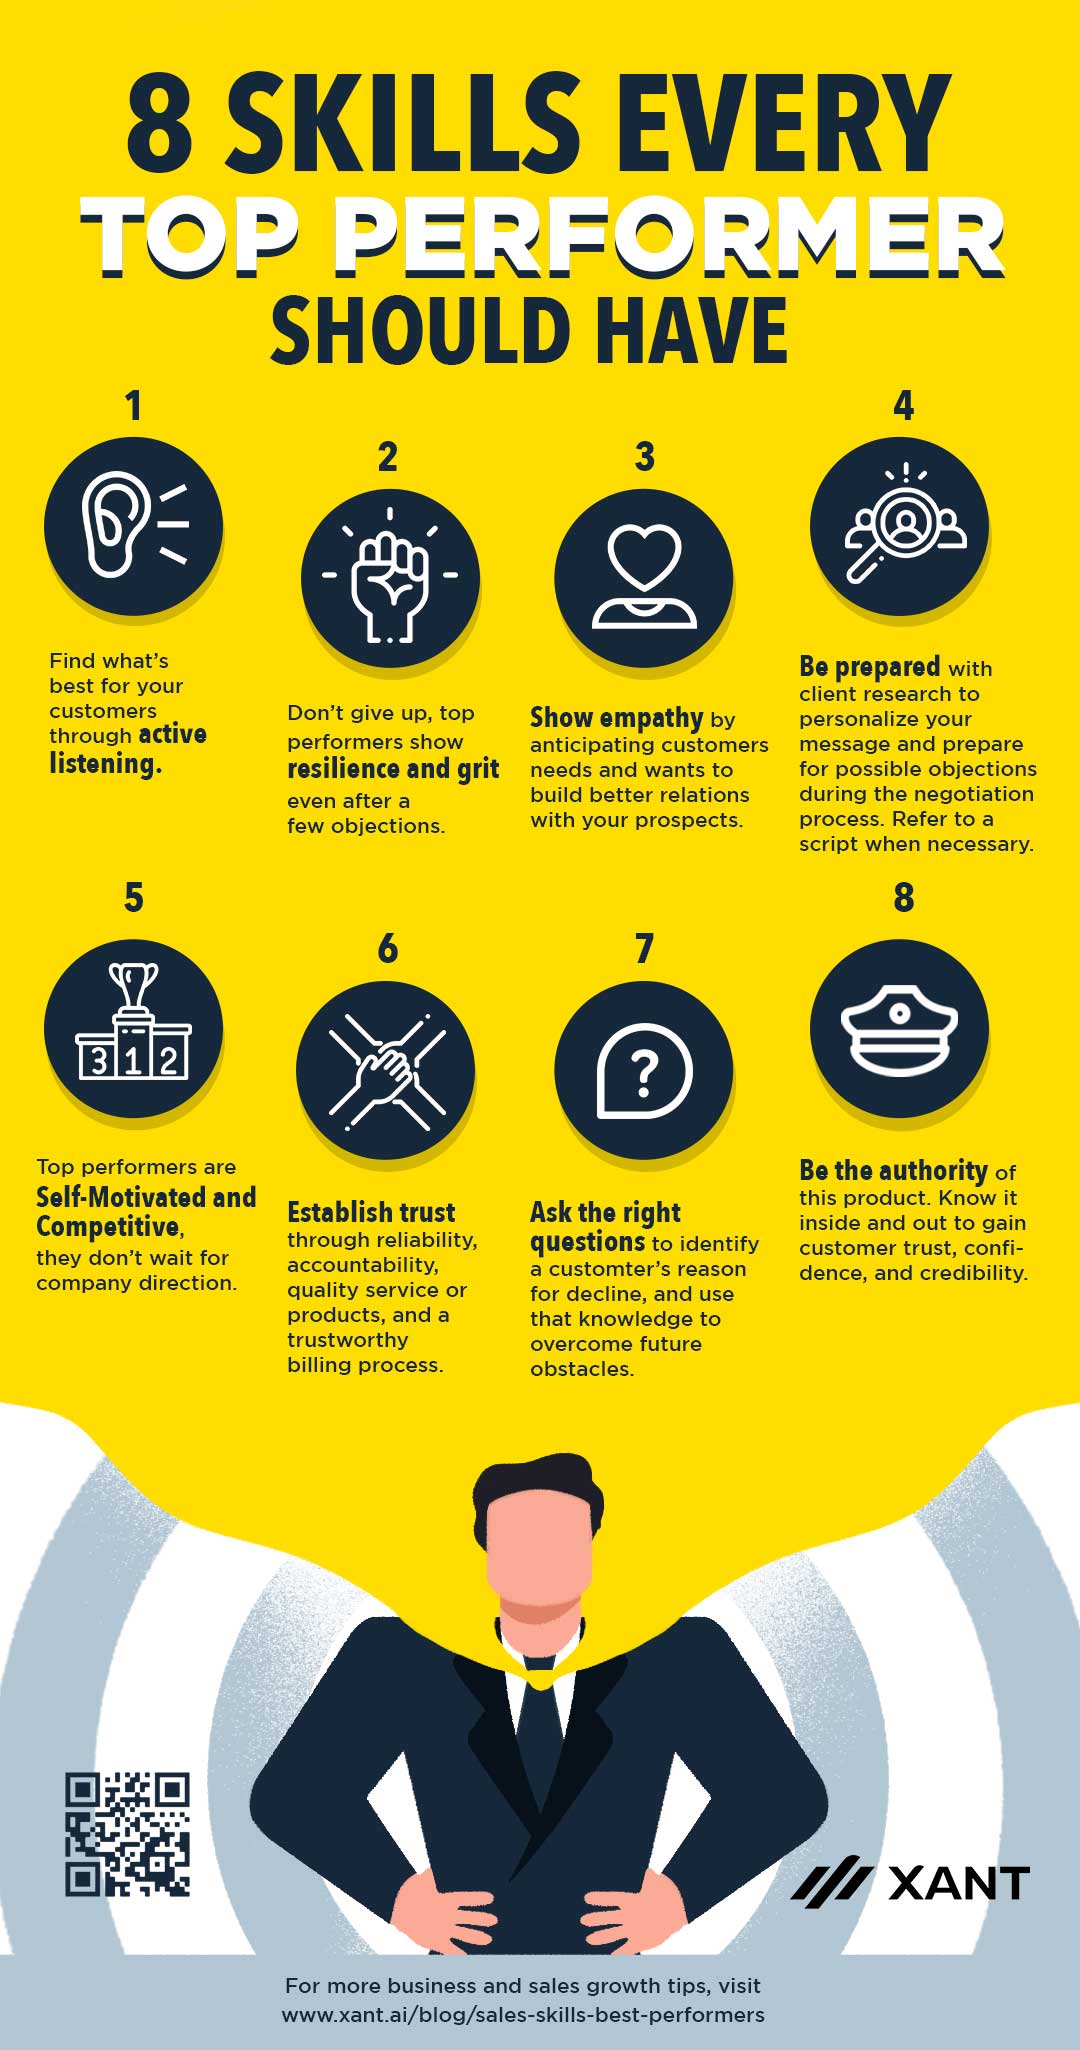 8 Salesperson Skills Of Top Performers: 1. Active Listening 2. Resilience and grit 3. Show empathy 4. Be prepared 5. Self-motivated and competitive 6. Establish trust 7. Ask the right questions 8. Be the authority [INFOGRAPHIC] | https://resources.insidesales.com/blog/sales-management/sales-skills-best-performers/